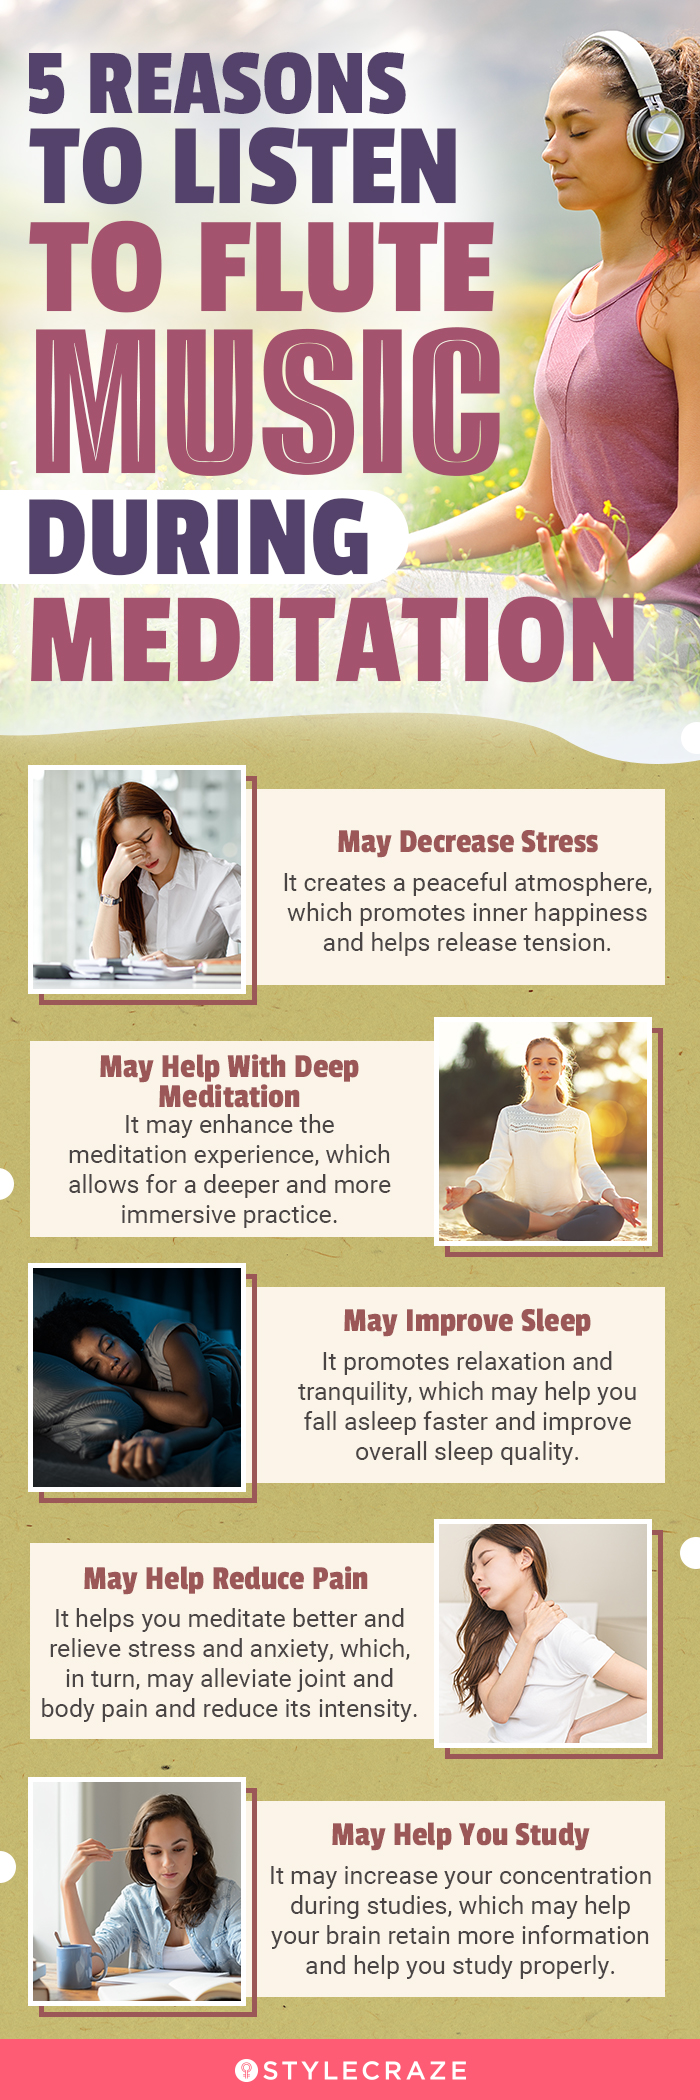 5 reasons to listen to flute music during meditation (infographic)